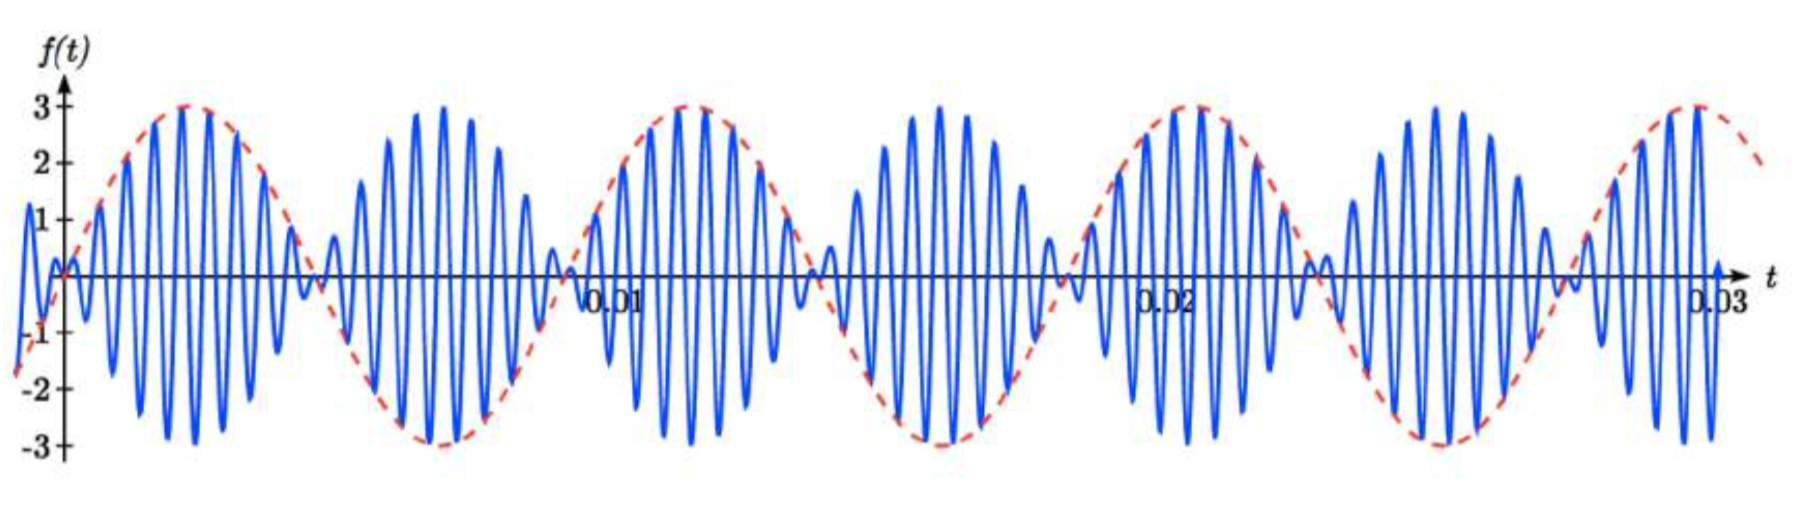 Three cycles of a sine graph are shown dashed in red, with a period of 1 over 110.  A much higher frequency sinusoidal-style curve is shown in blue, with a period of 1 over 2000, with a midline at 0, and the peaks and valleys of the curve touching the dashed sine curve and its vertical reflection.